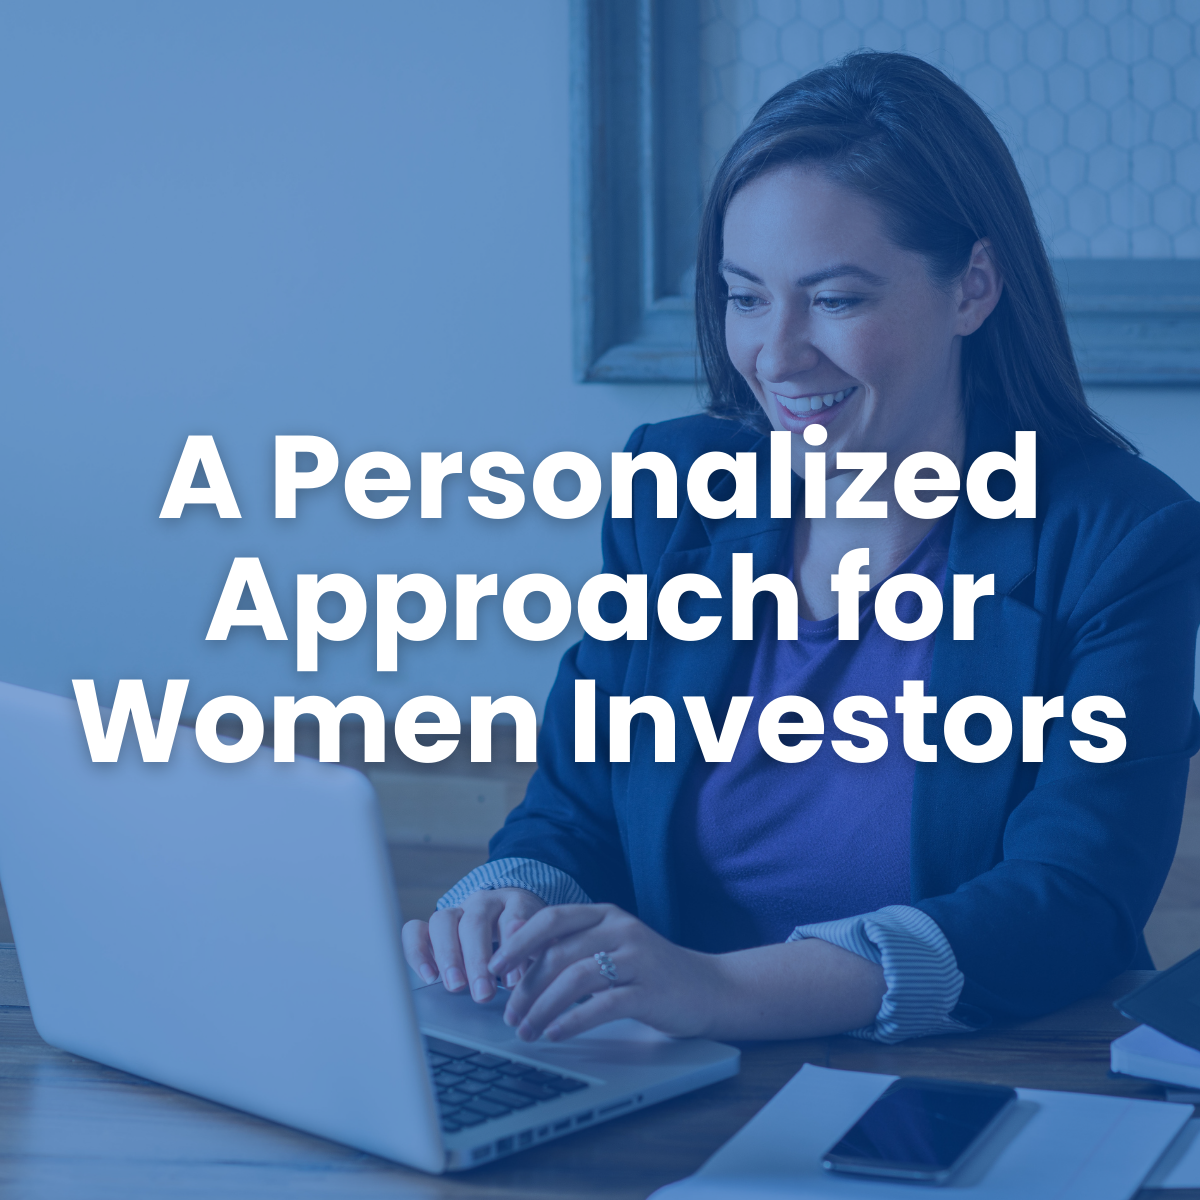 A Personalized Approach for Women Investors